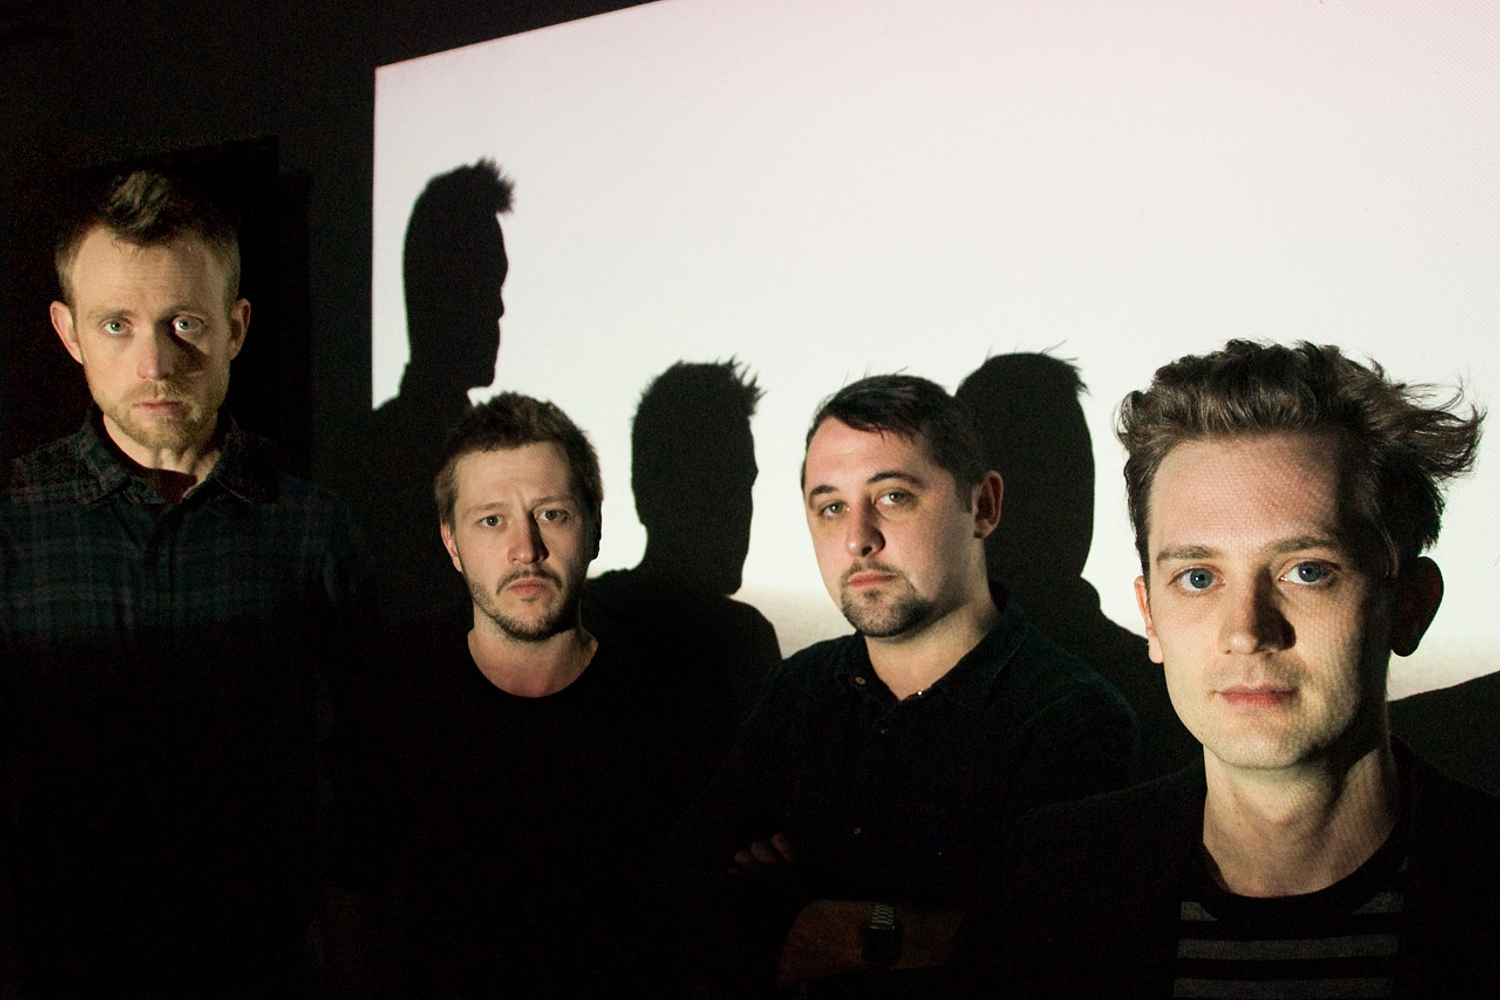 65daysofstatic, on how they created an infinite soundtrack